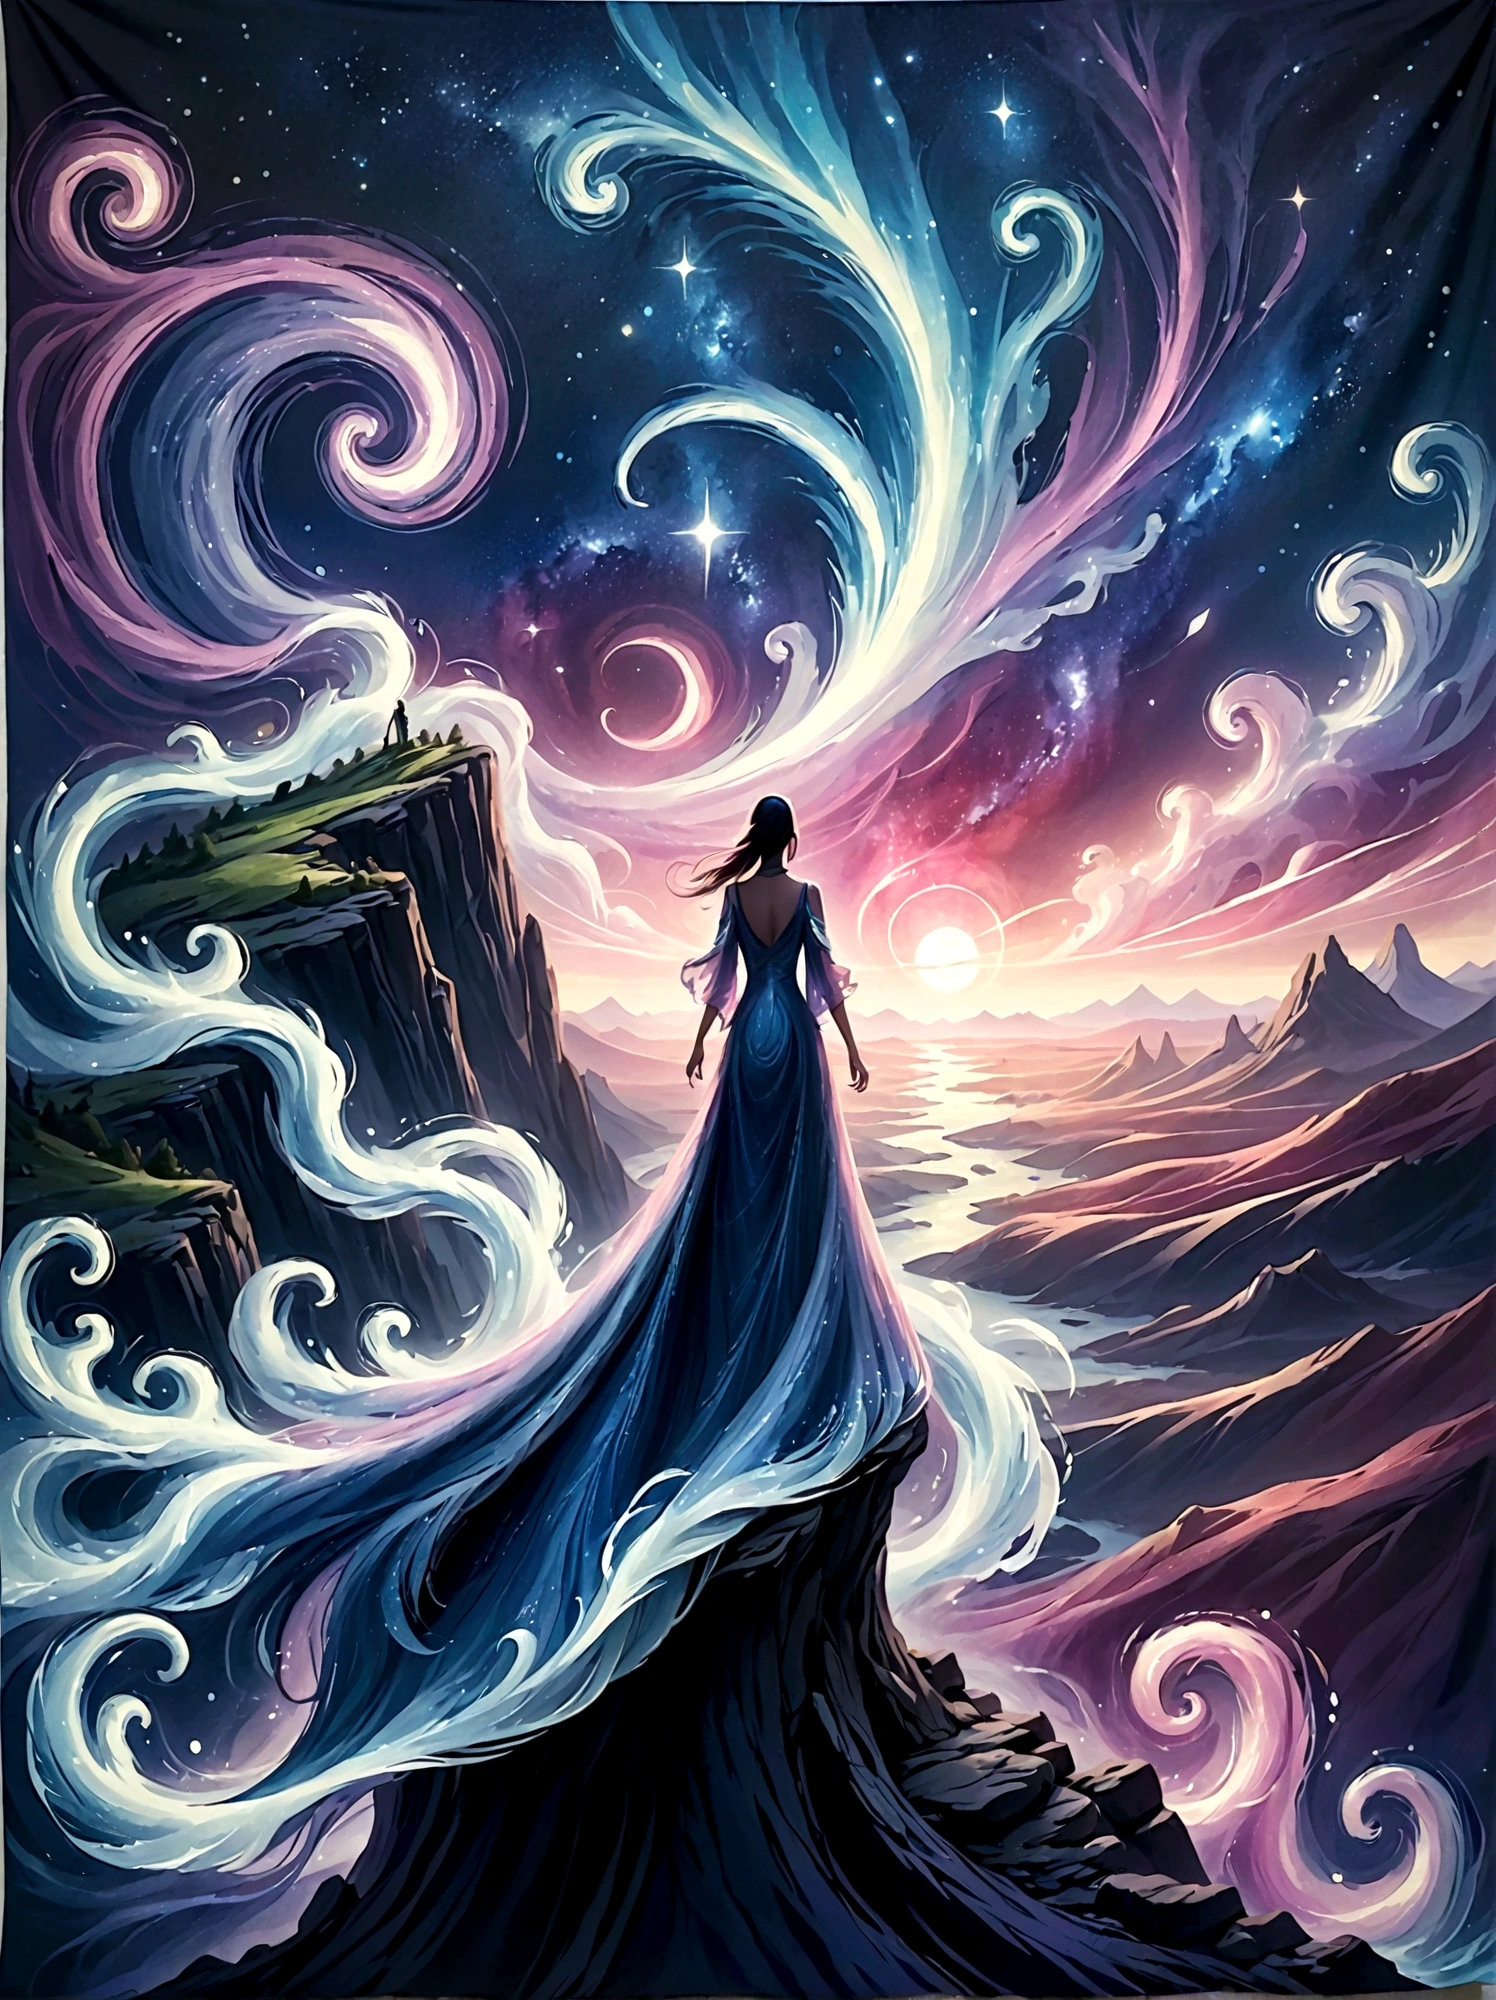 Look from the back，A man standing on a cliff，In a dreamy, hazy landscape，With your back to the audience，Surrounded by a vortex of cosmic energy，The back of a person wrapped in a flowing robe，Blending with the celestial currents，The sky is a tapestry of deep purples and blues，Dotted with stars，The scenery below vaguely shows the rolling mountains，This scene is peaceful and sublime，Capturing the majestic nature of the universe，A pensive figure stands in awe